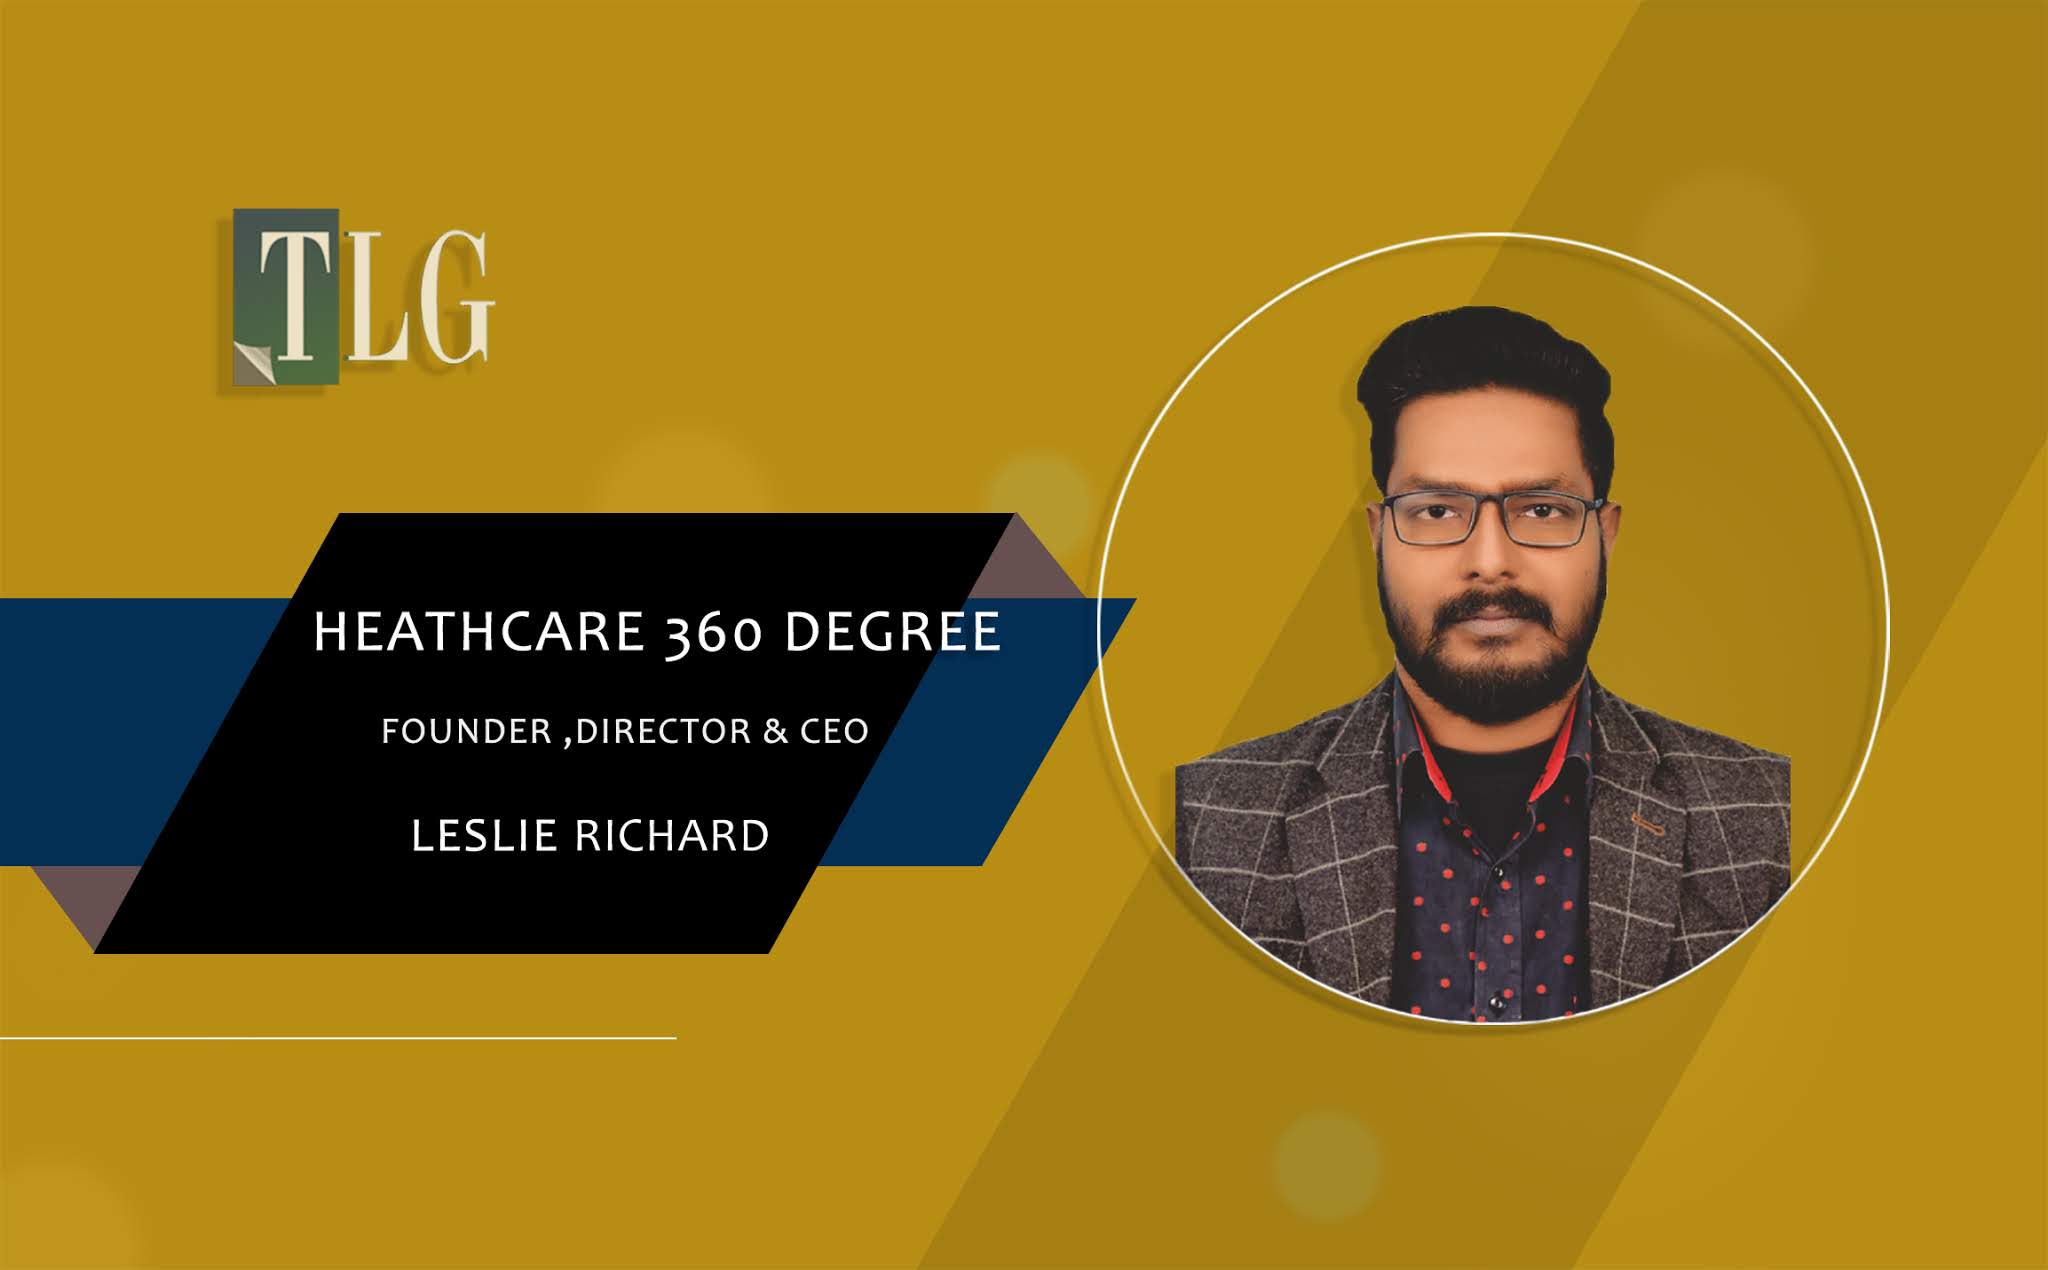 Healthcare 360 Degree: An Emblematic Leader in the Healthcare Industry